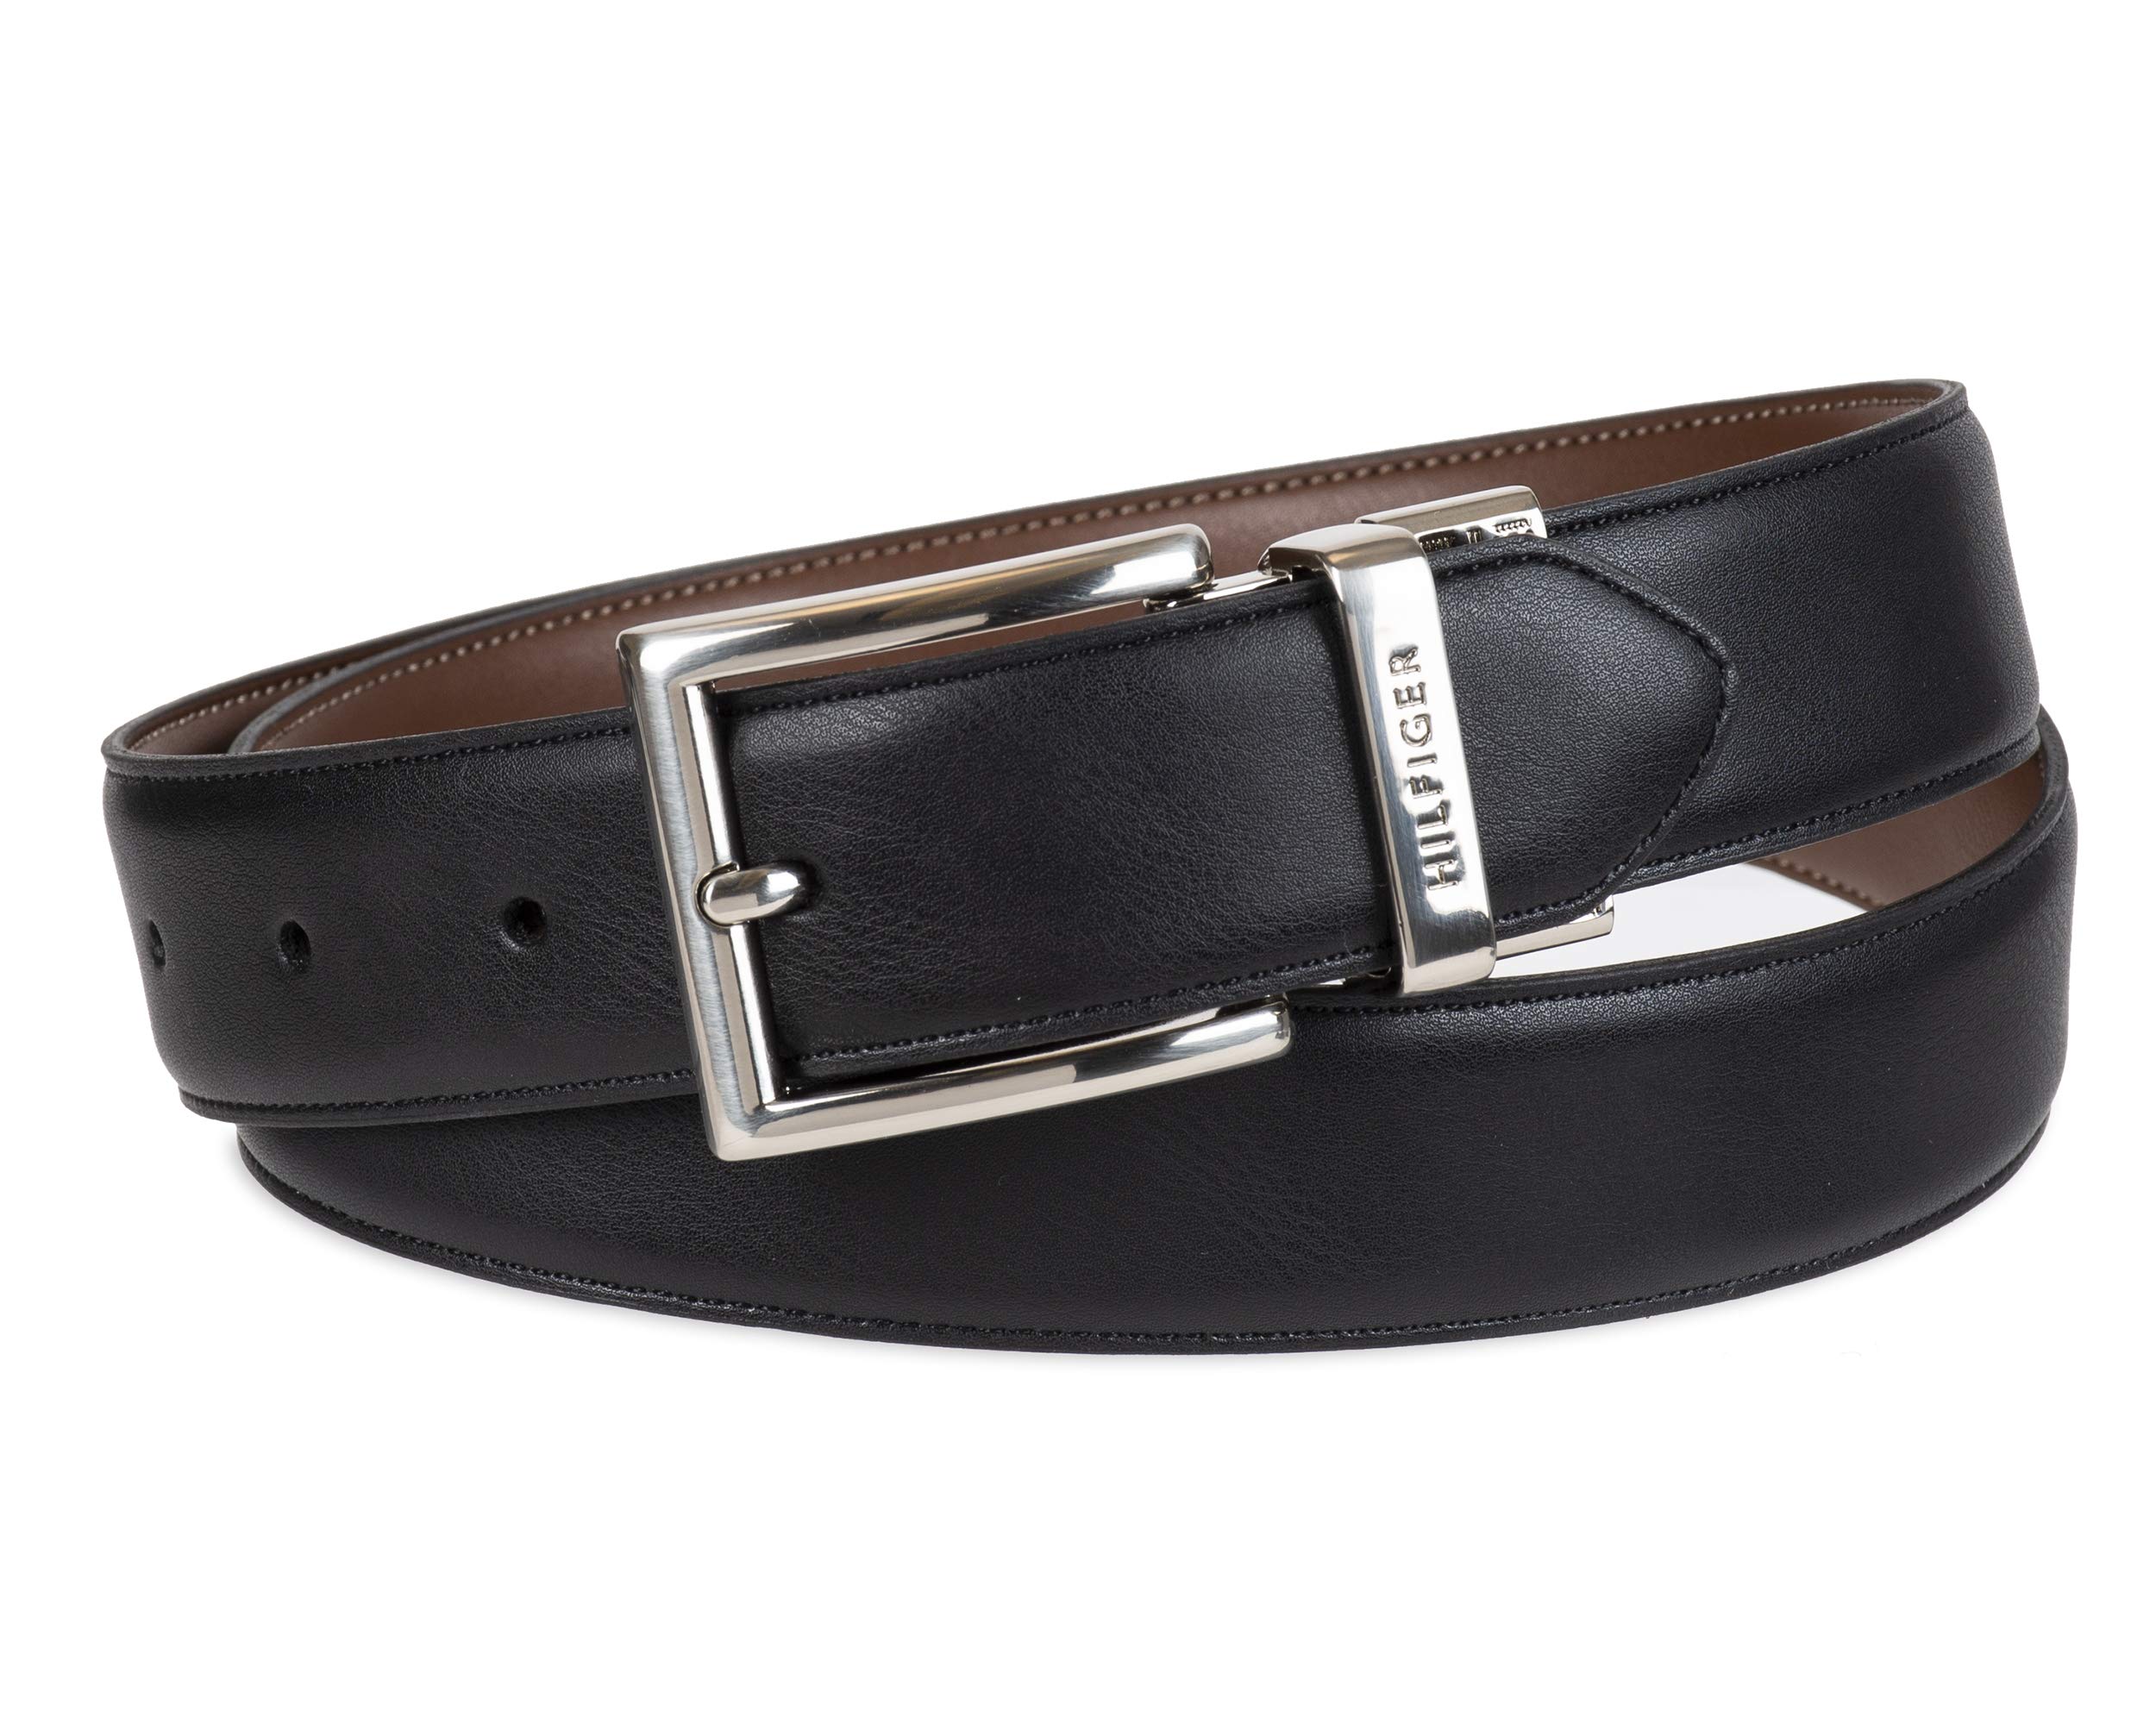 Tommy Hilfiger Men's Reversible Two-In-One Rotative Buckle Belt